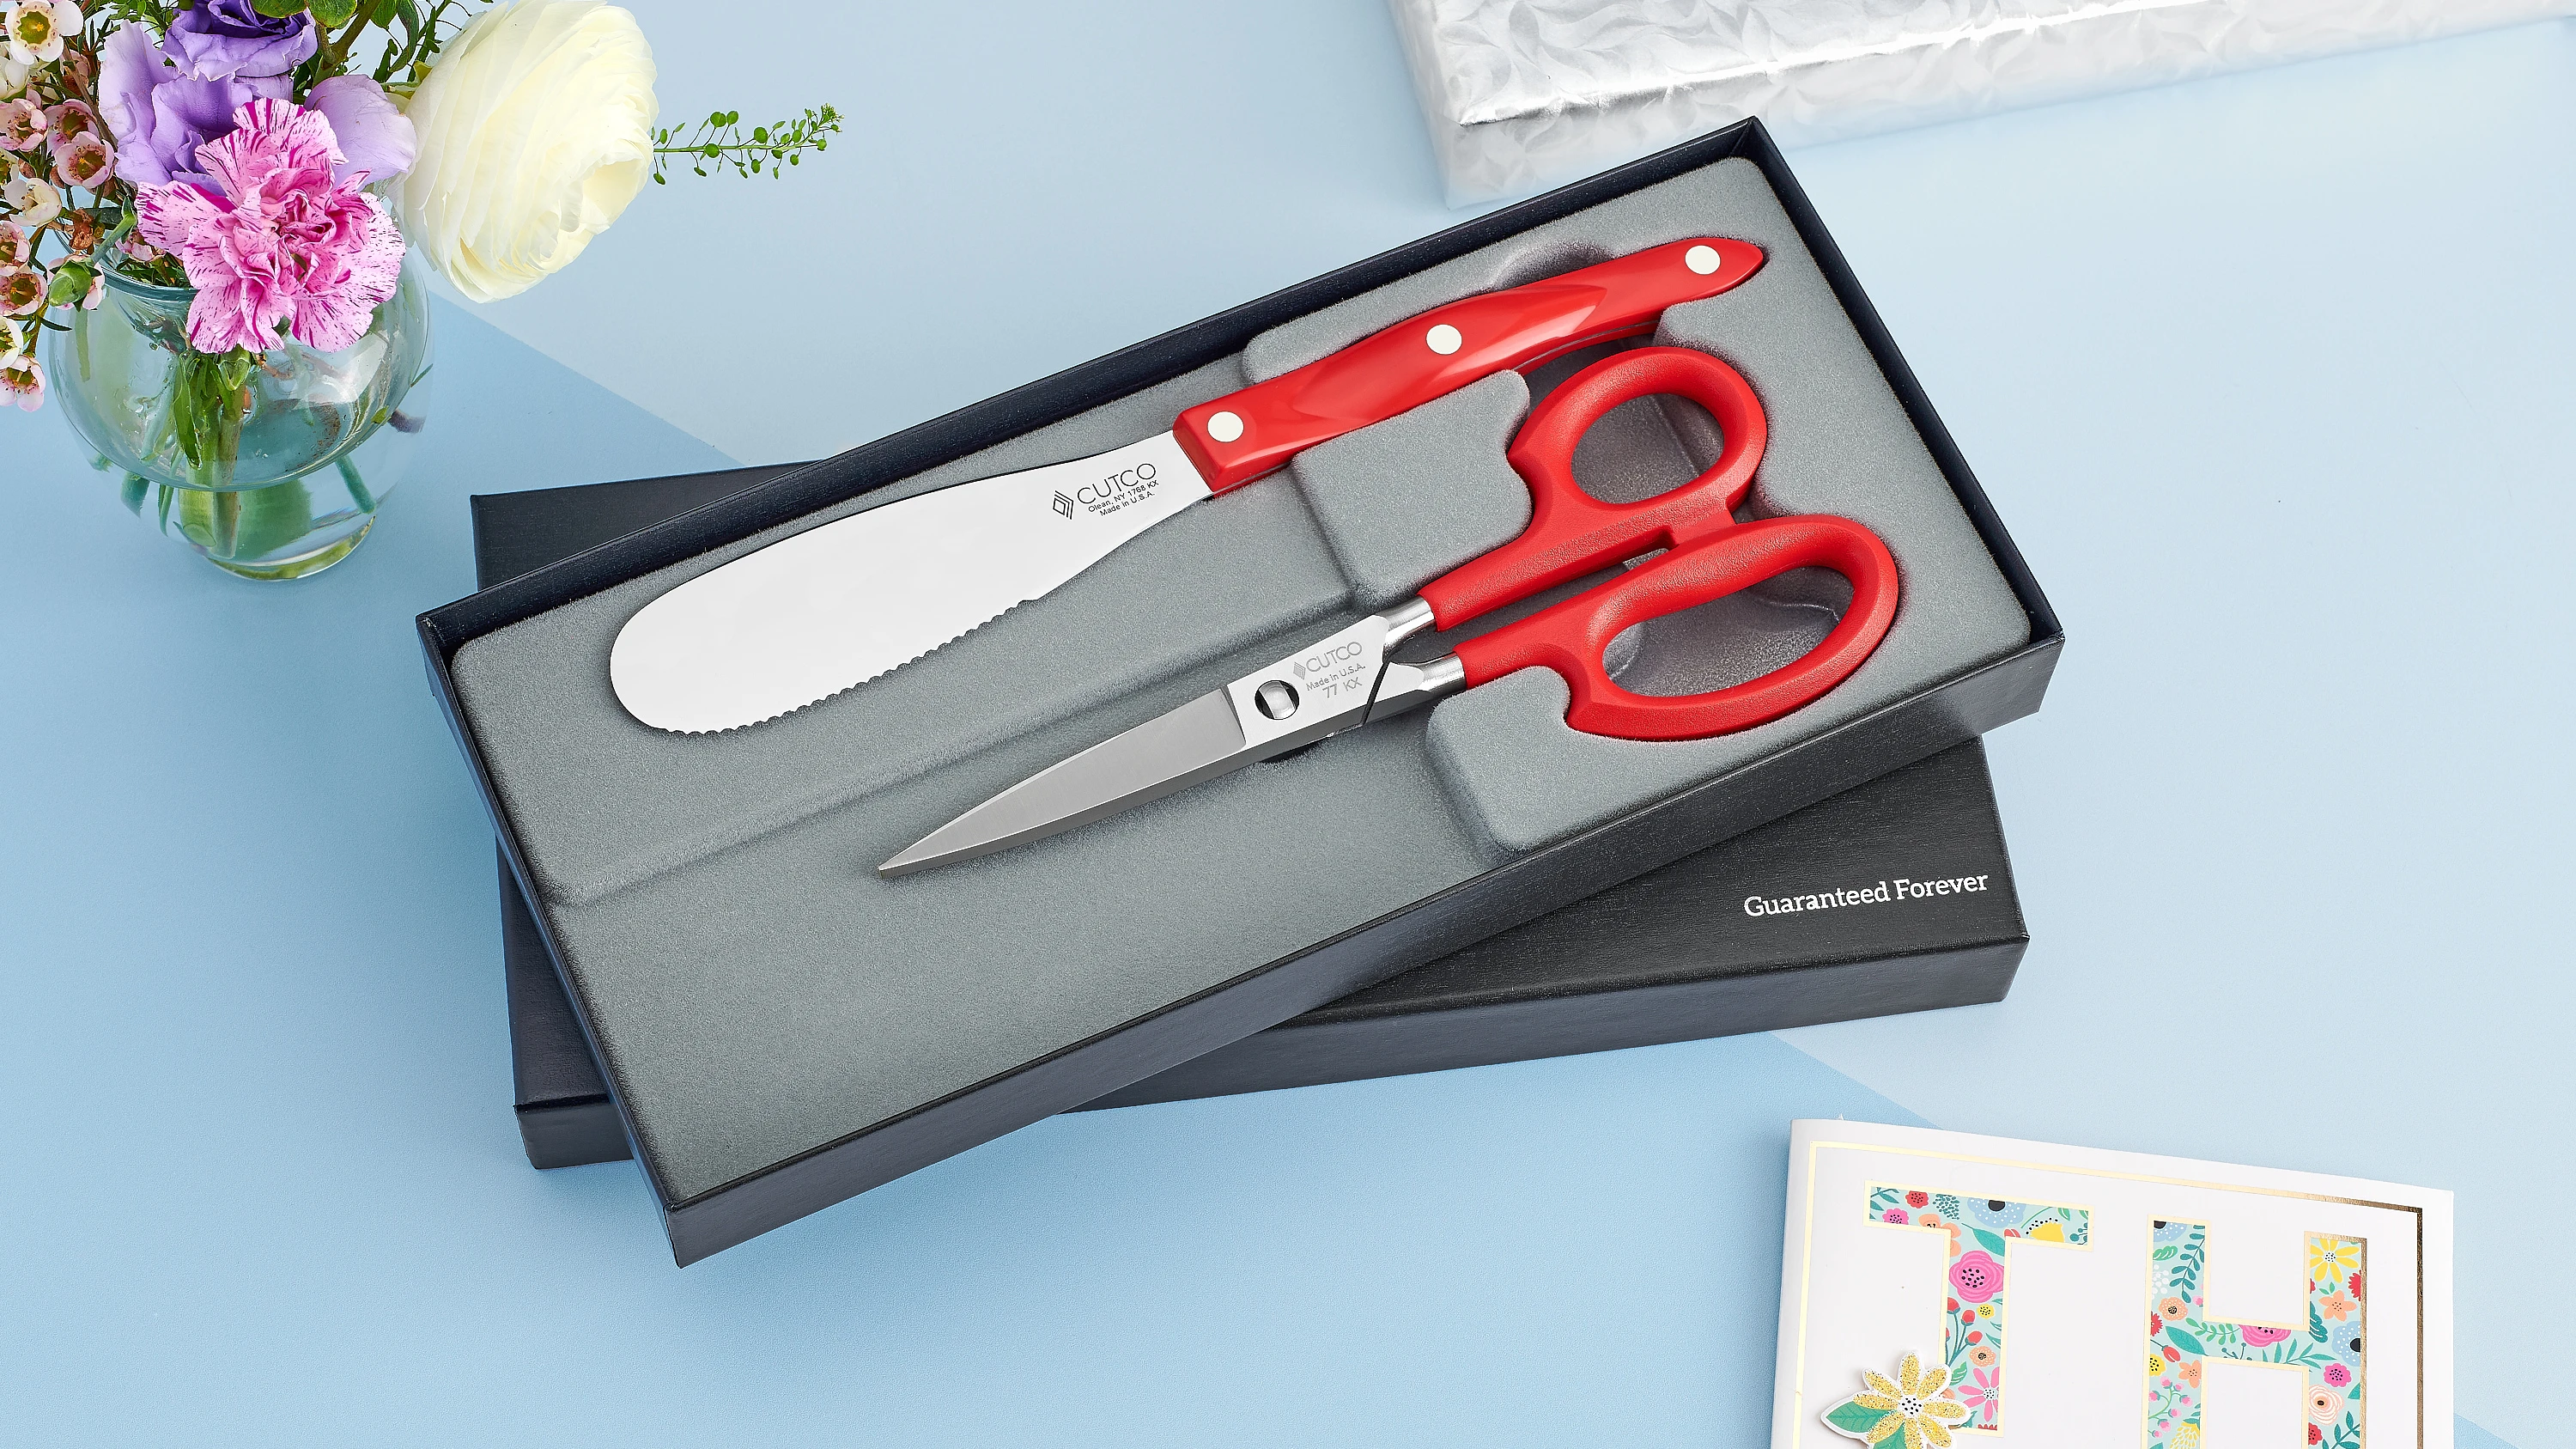 Entertainer Pack, 4 Pieces, Gift-Boxed Knife Sets by Cutco